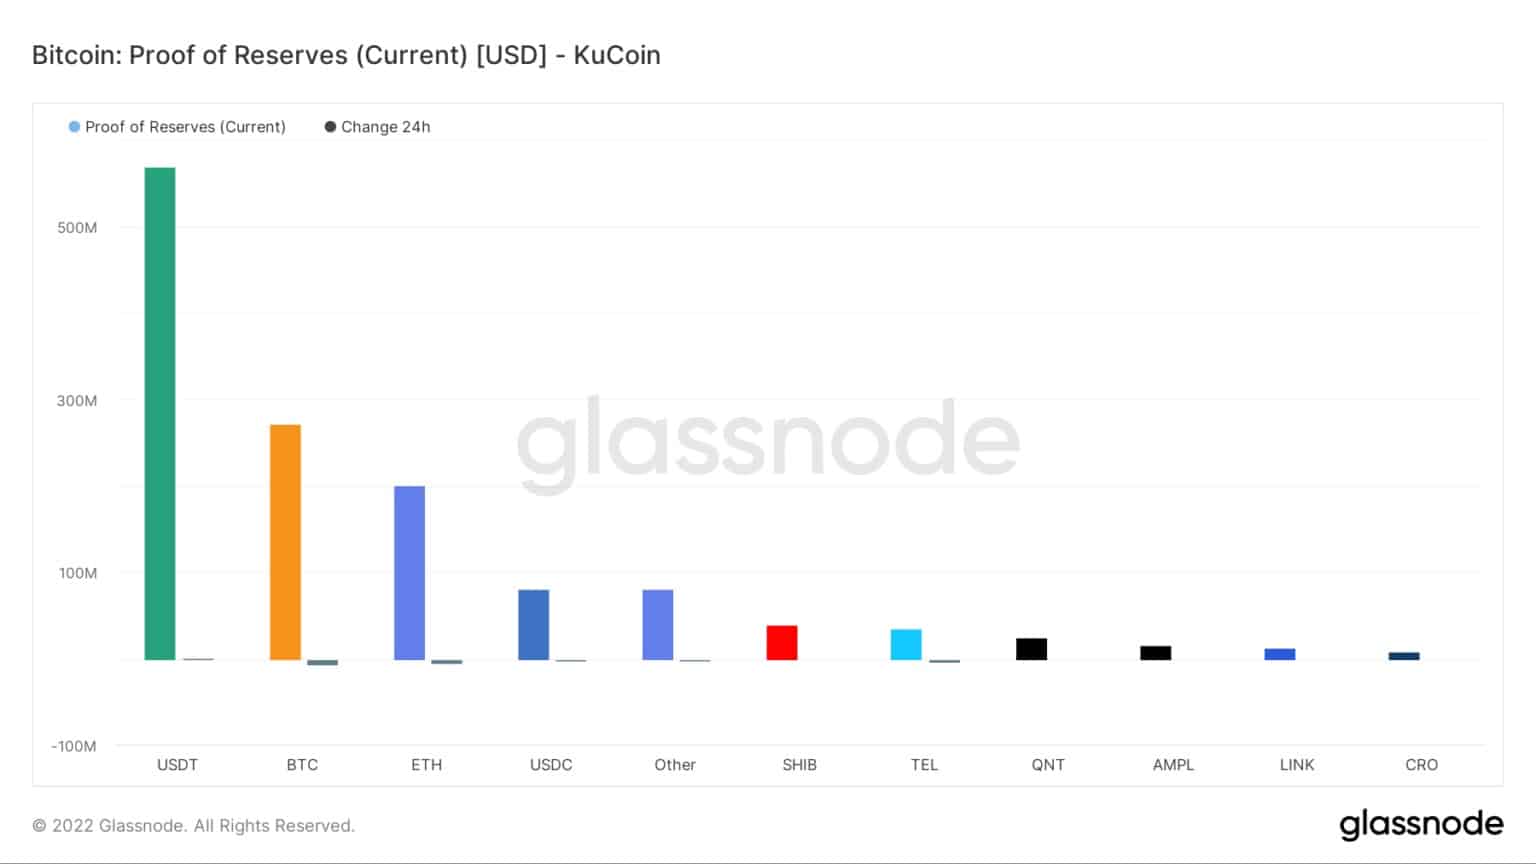 Proof of reserves - KuCoin